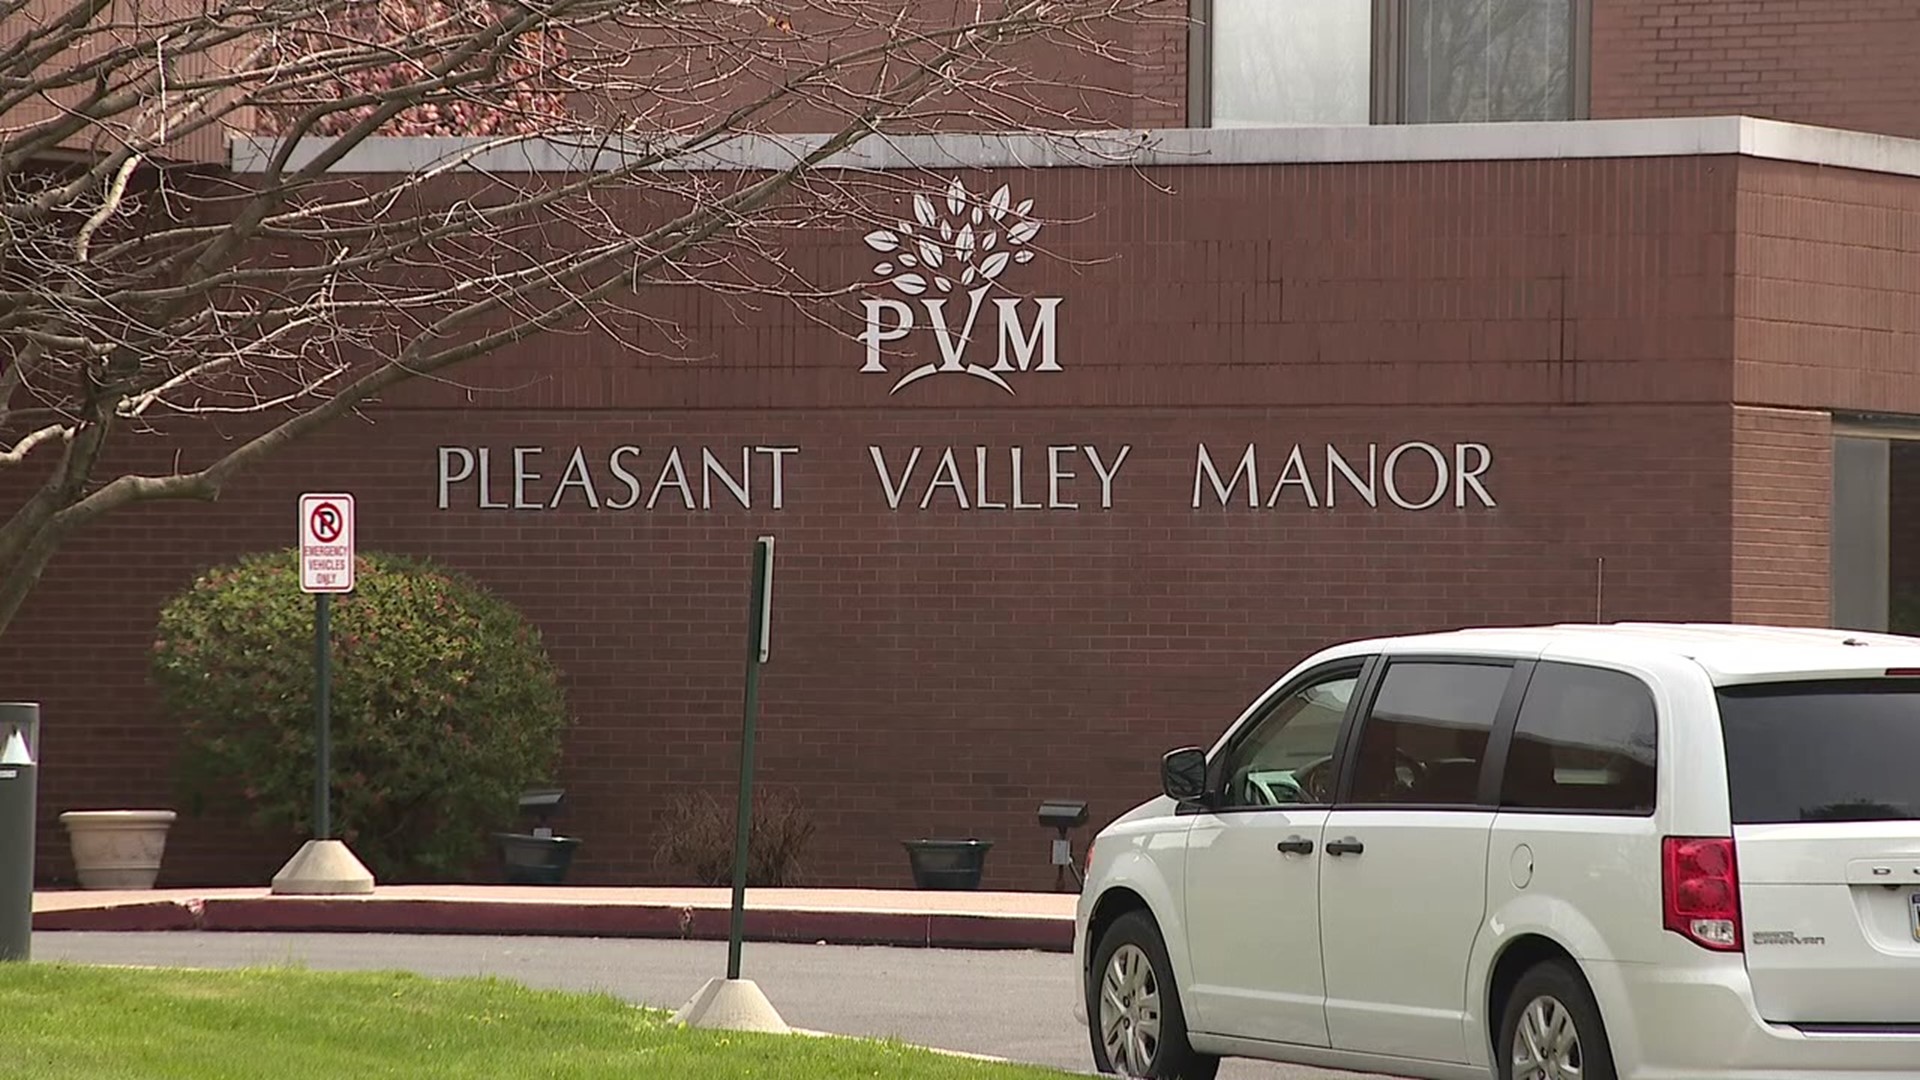 Seven residents of Pleasant Valley Manor have died due to complications from the coronavirus. Dozens of other residents and staff members have tested positive.